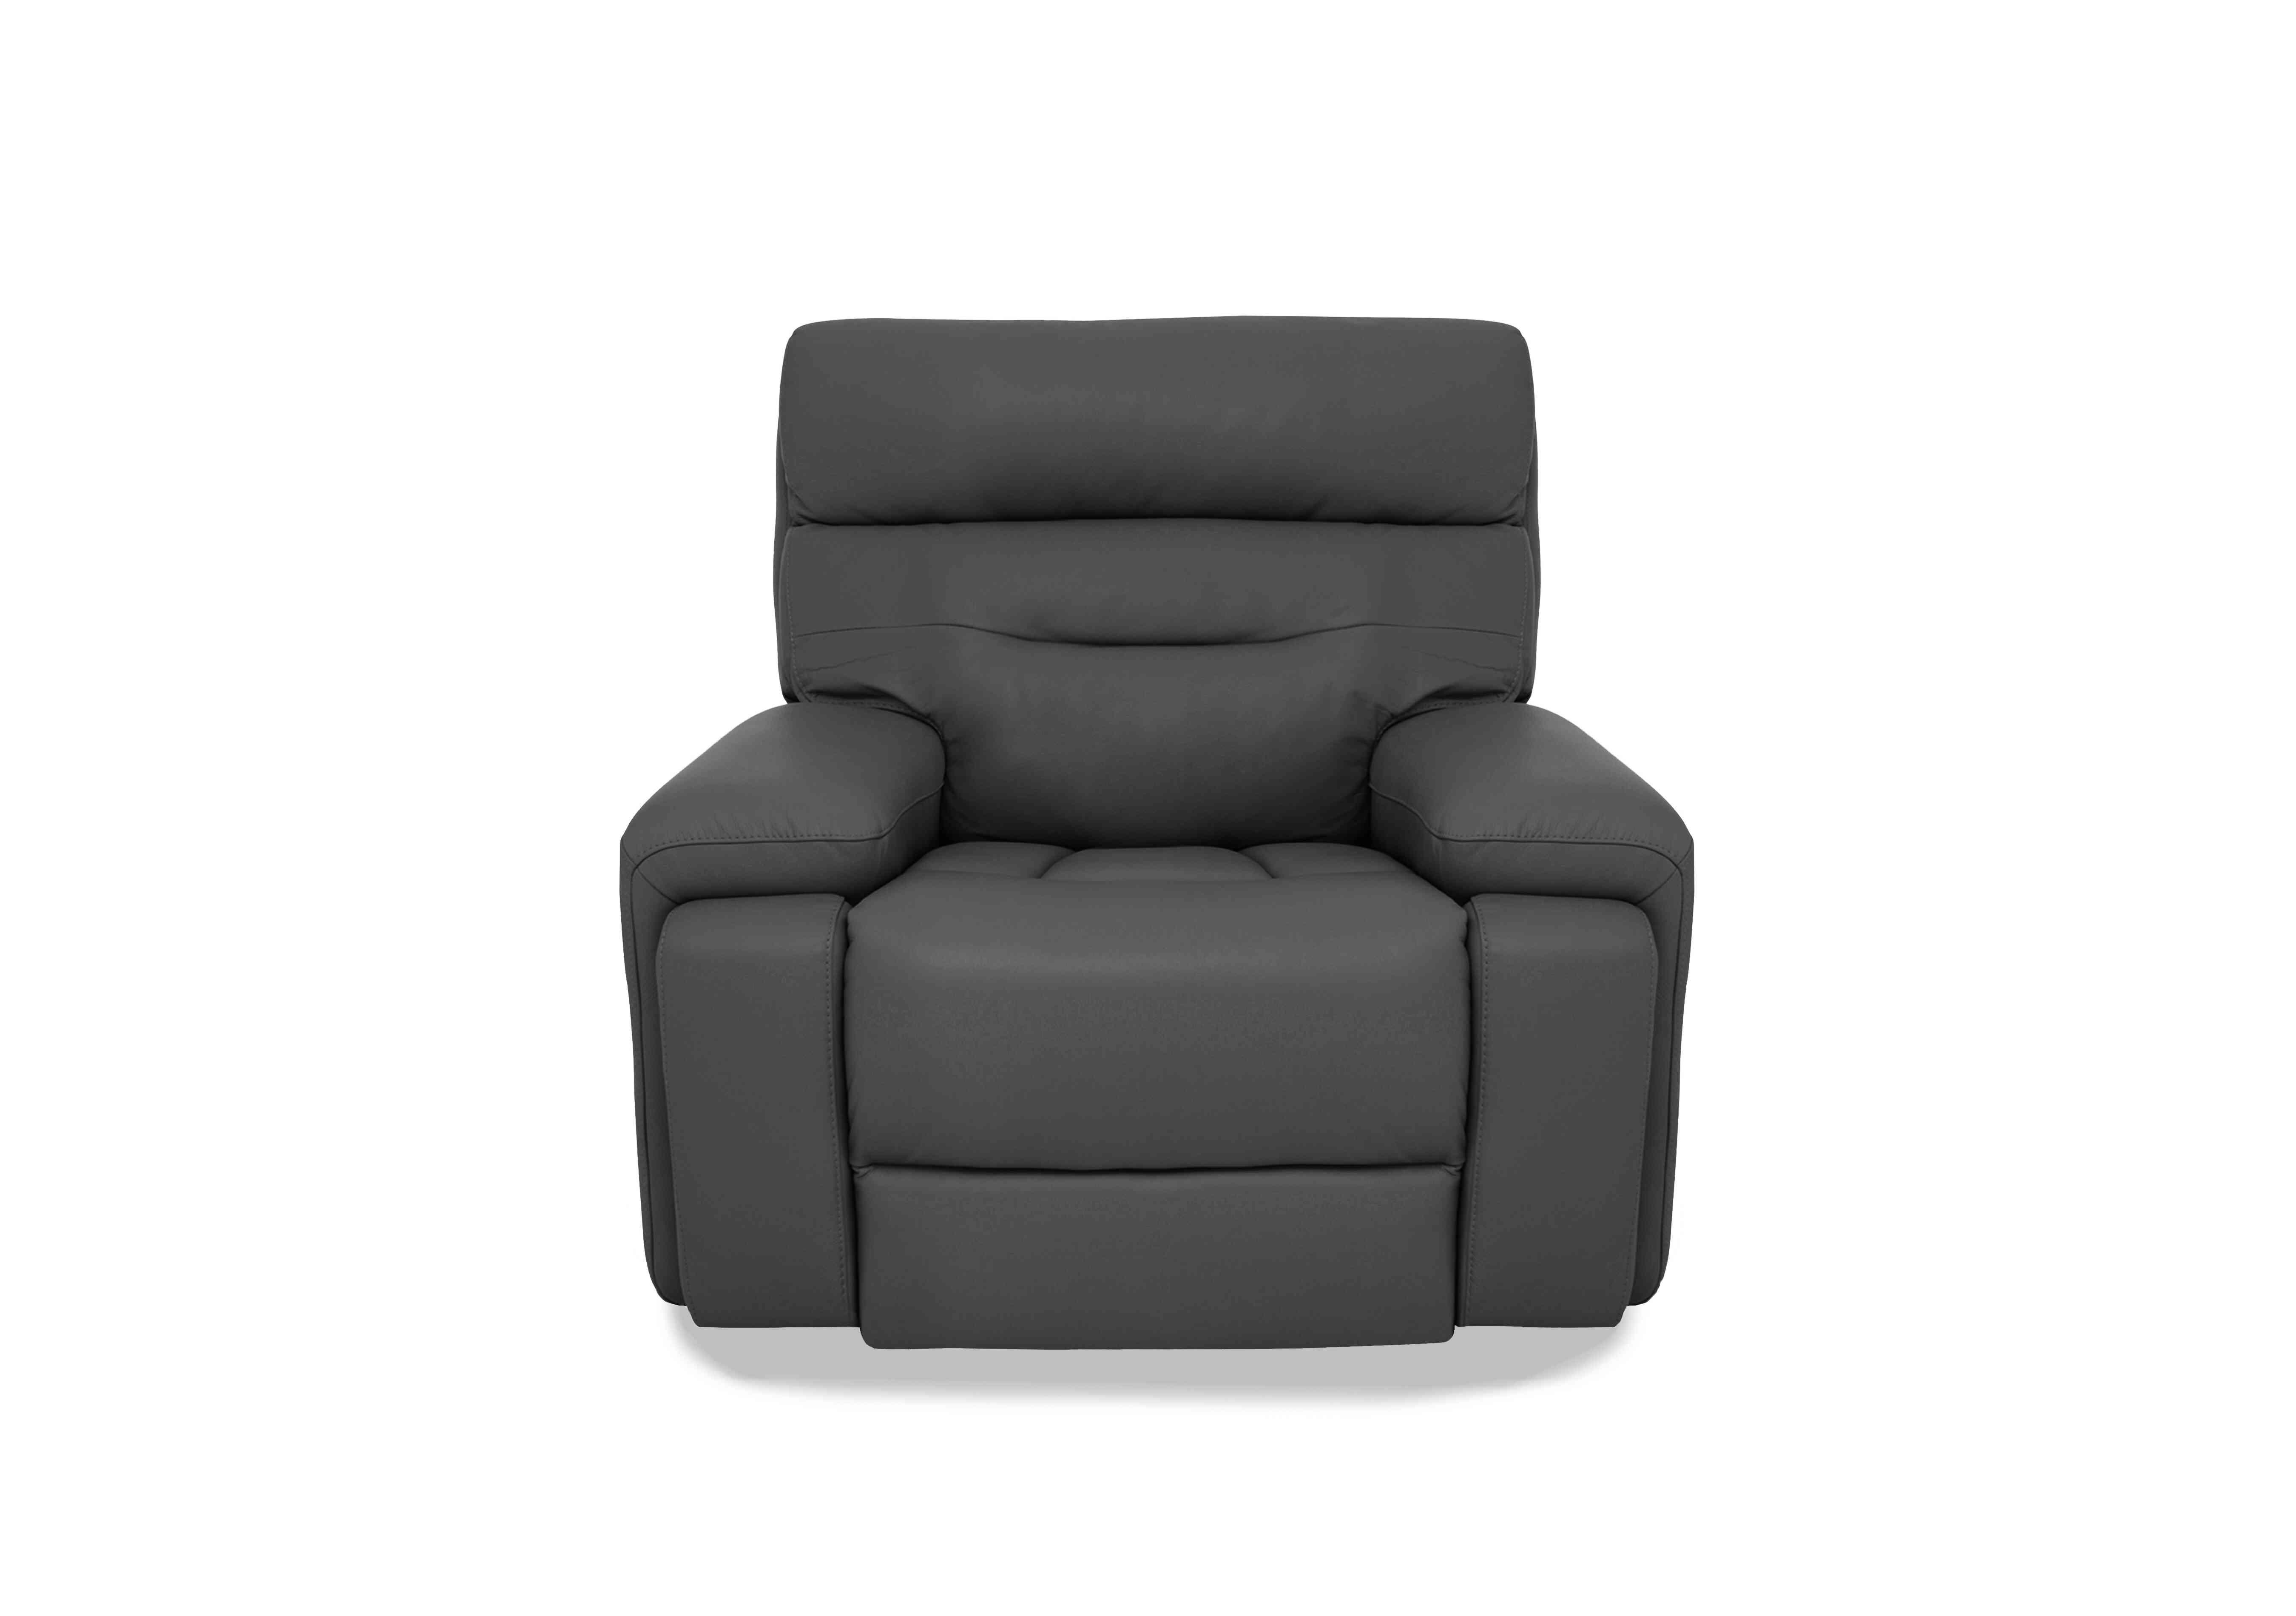 Cinemax Leather Chair in Le-9308 Grey on Furniture Village